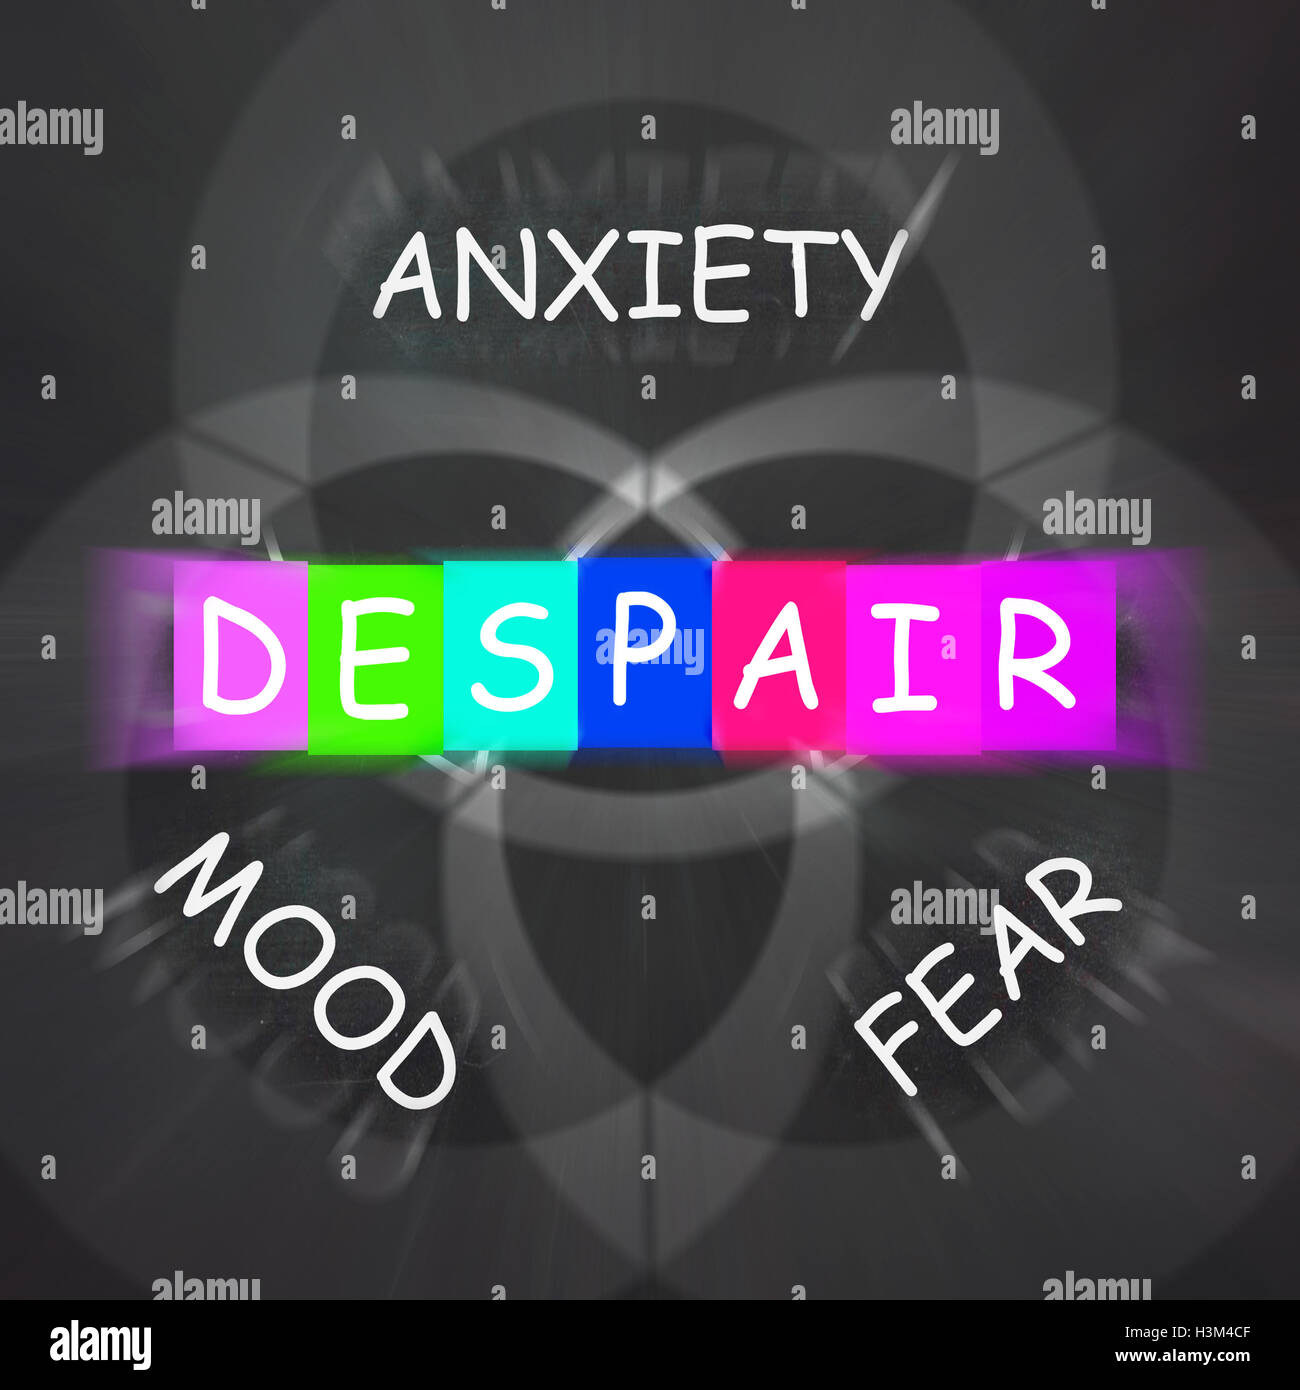 Despair Displays a Mood of Fear and Anxiety Stock Photo